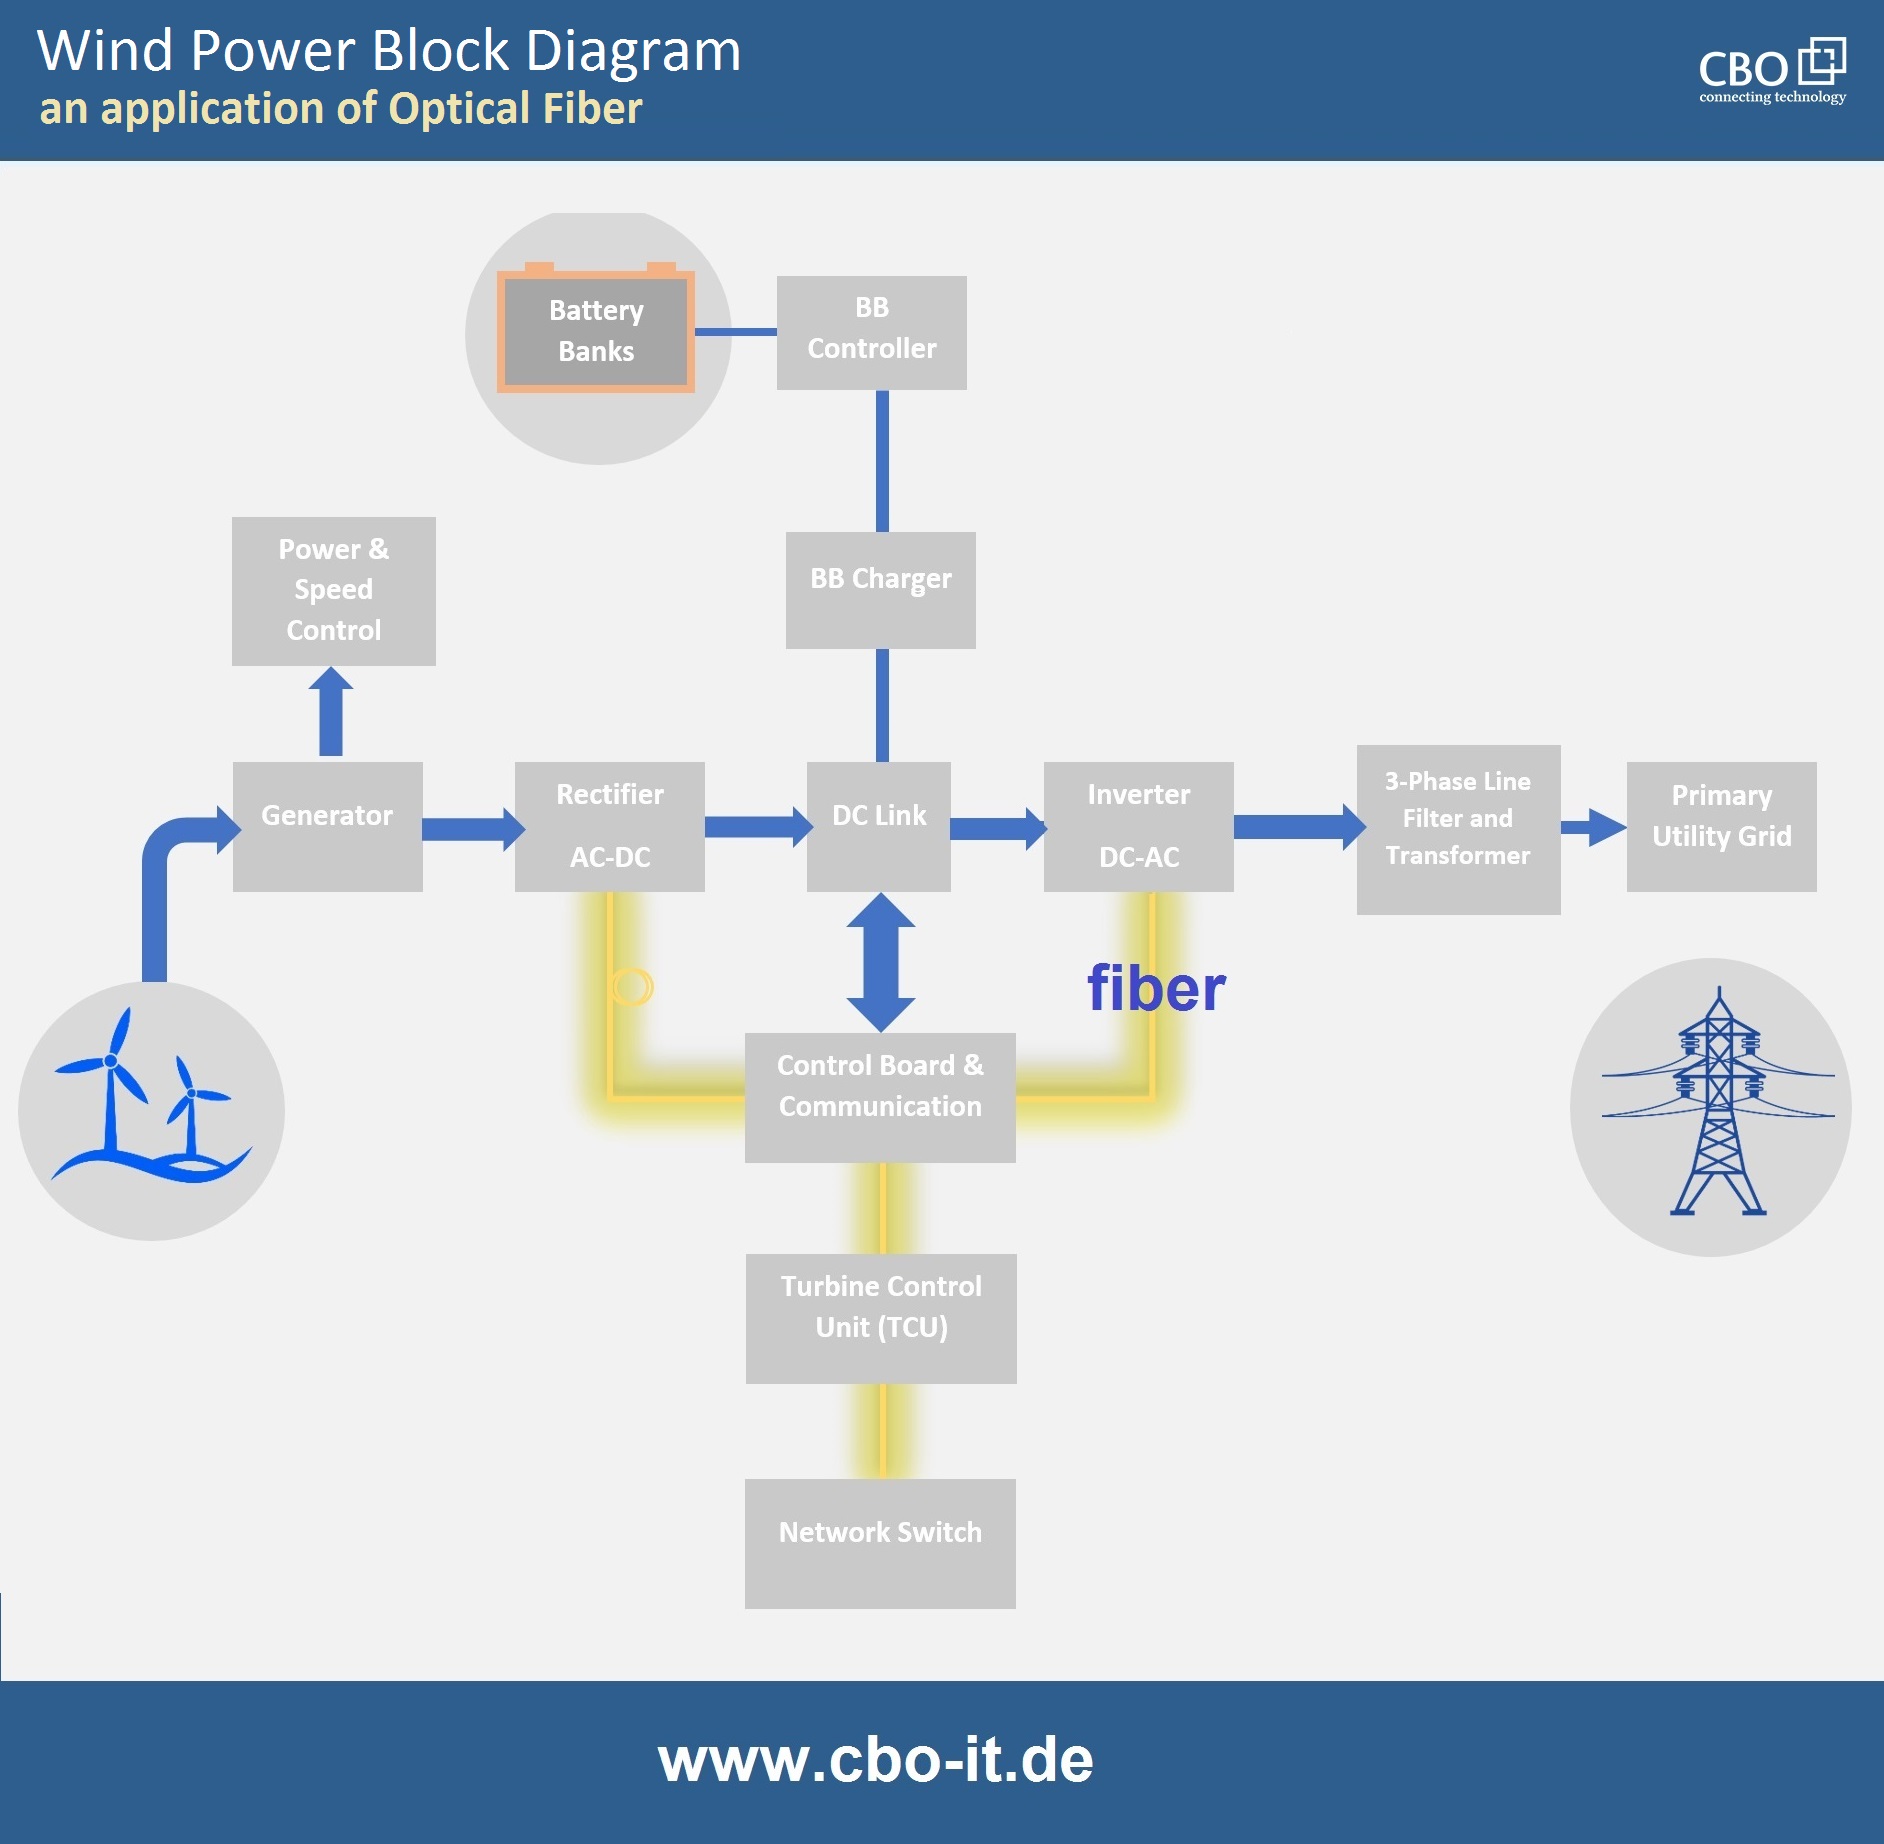 Appication of Optical Fiber in Wind Power - Block Diagram